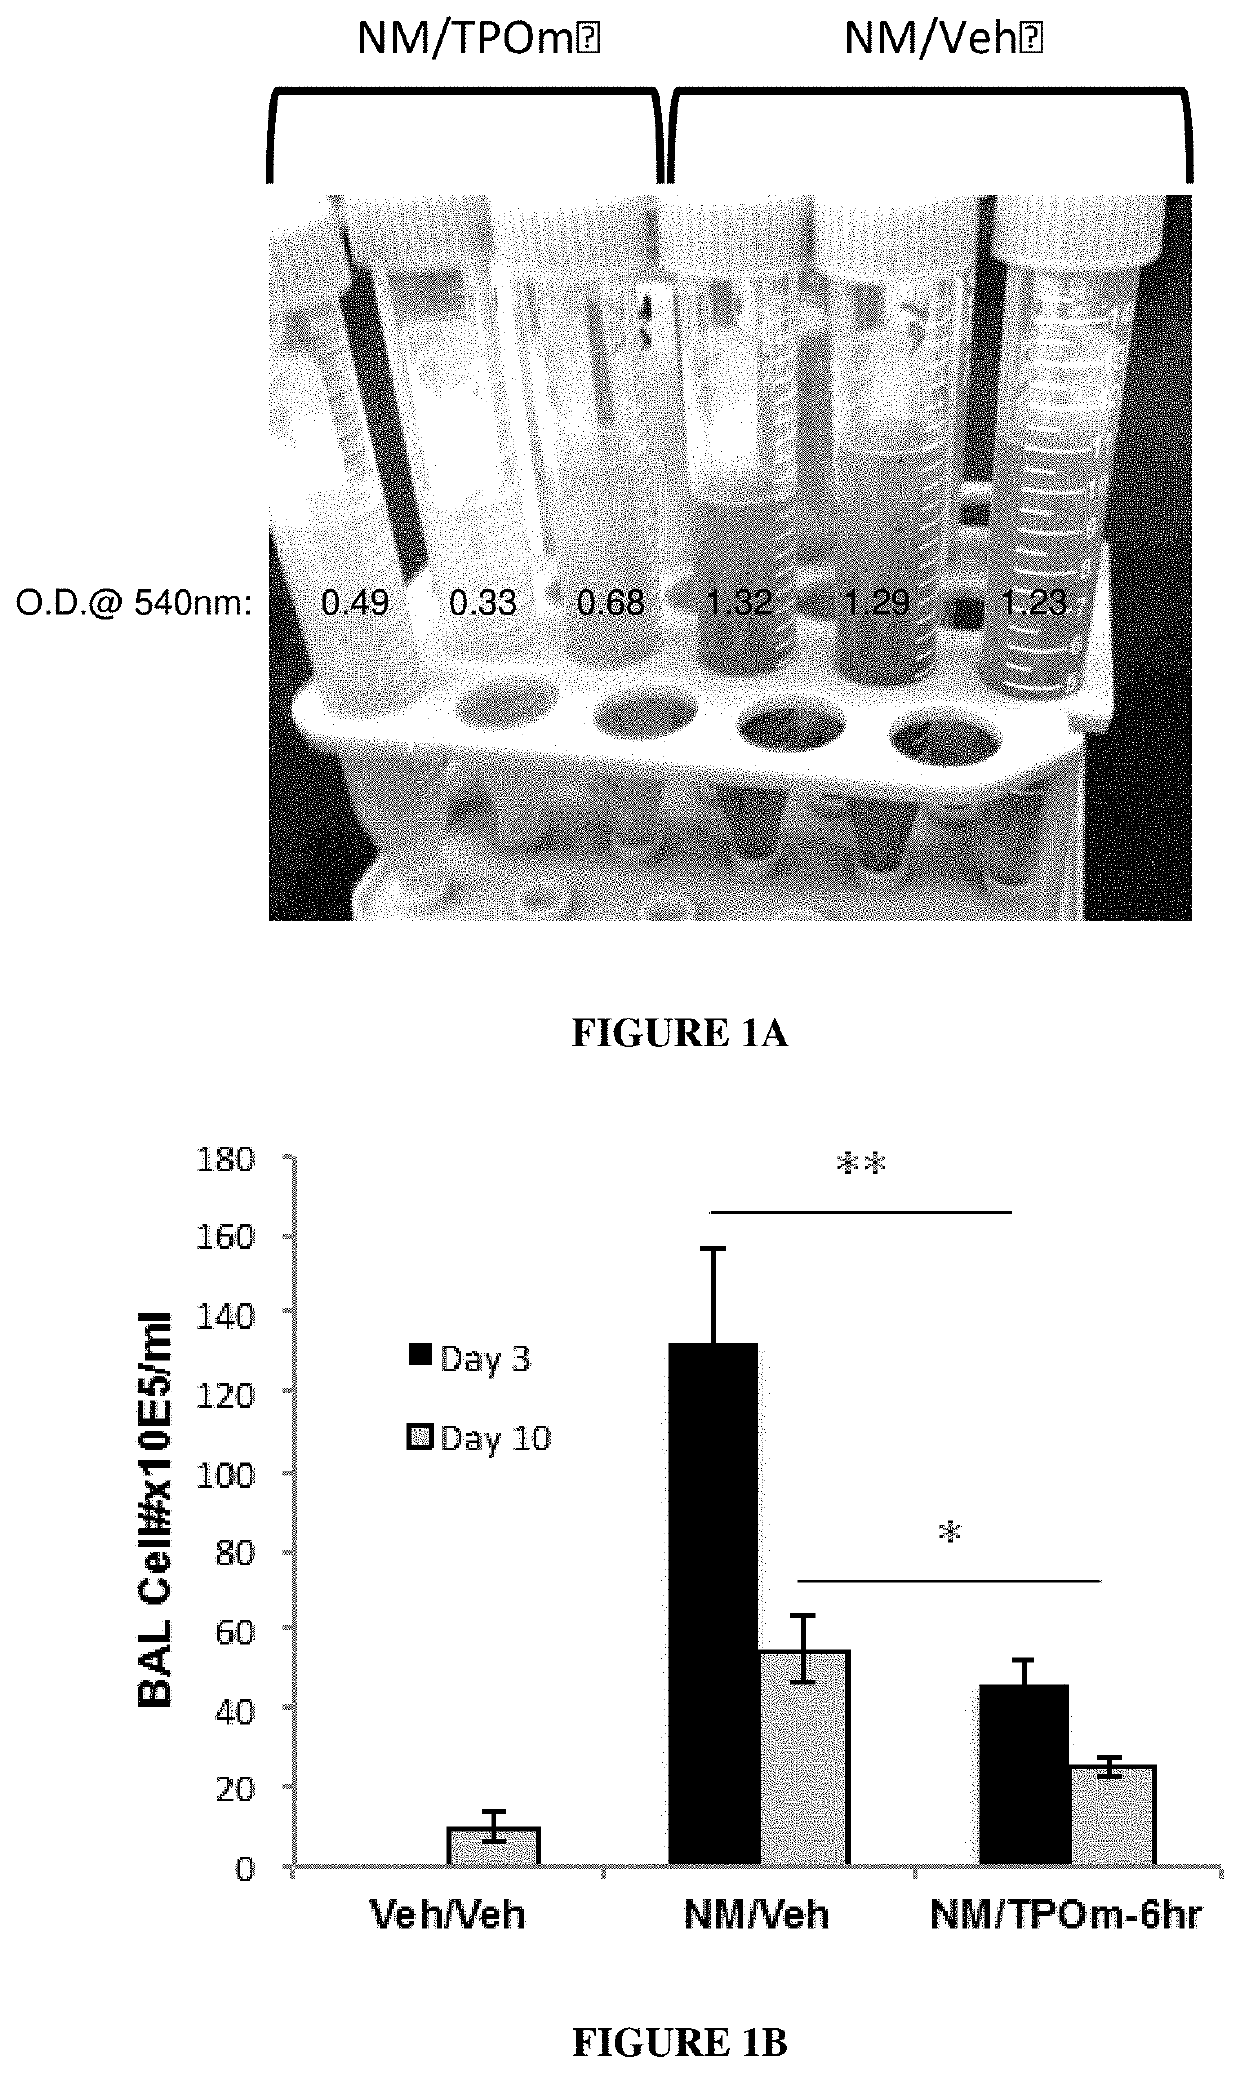 Methods of mitigating toxic effects of vesicants and caustic gas